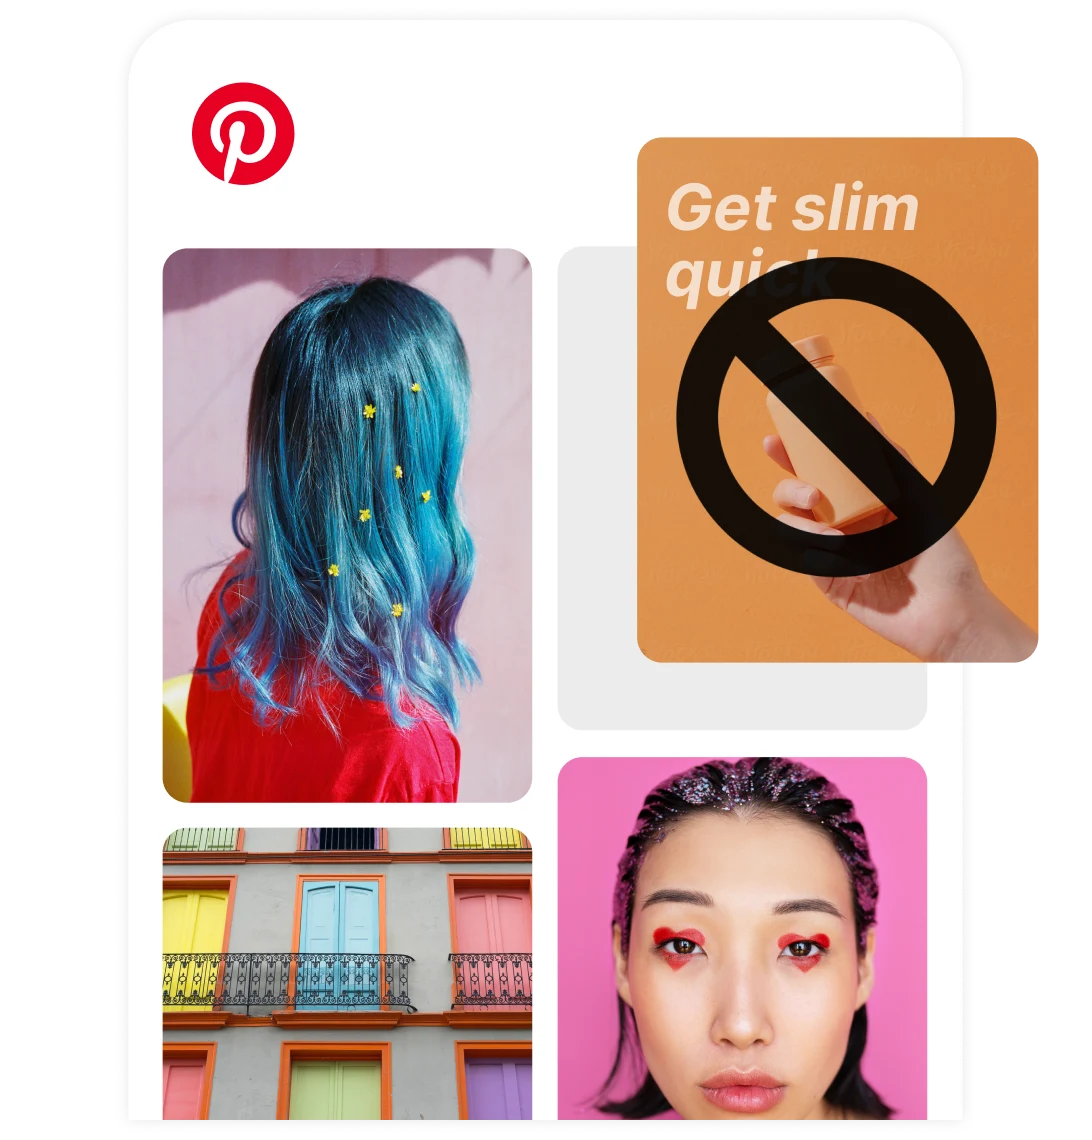 Pinterest home feed, featuring a variety of Pins including a diet-focused one that's marked with a bolded "No" symbol.